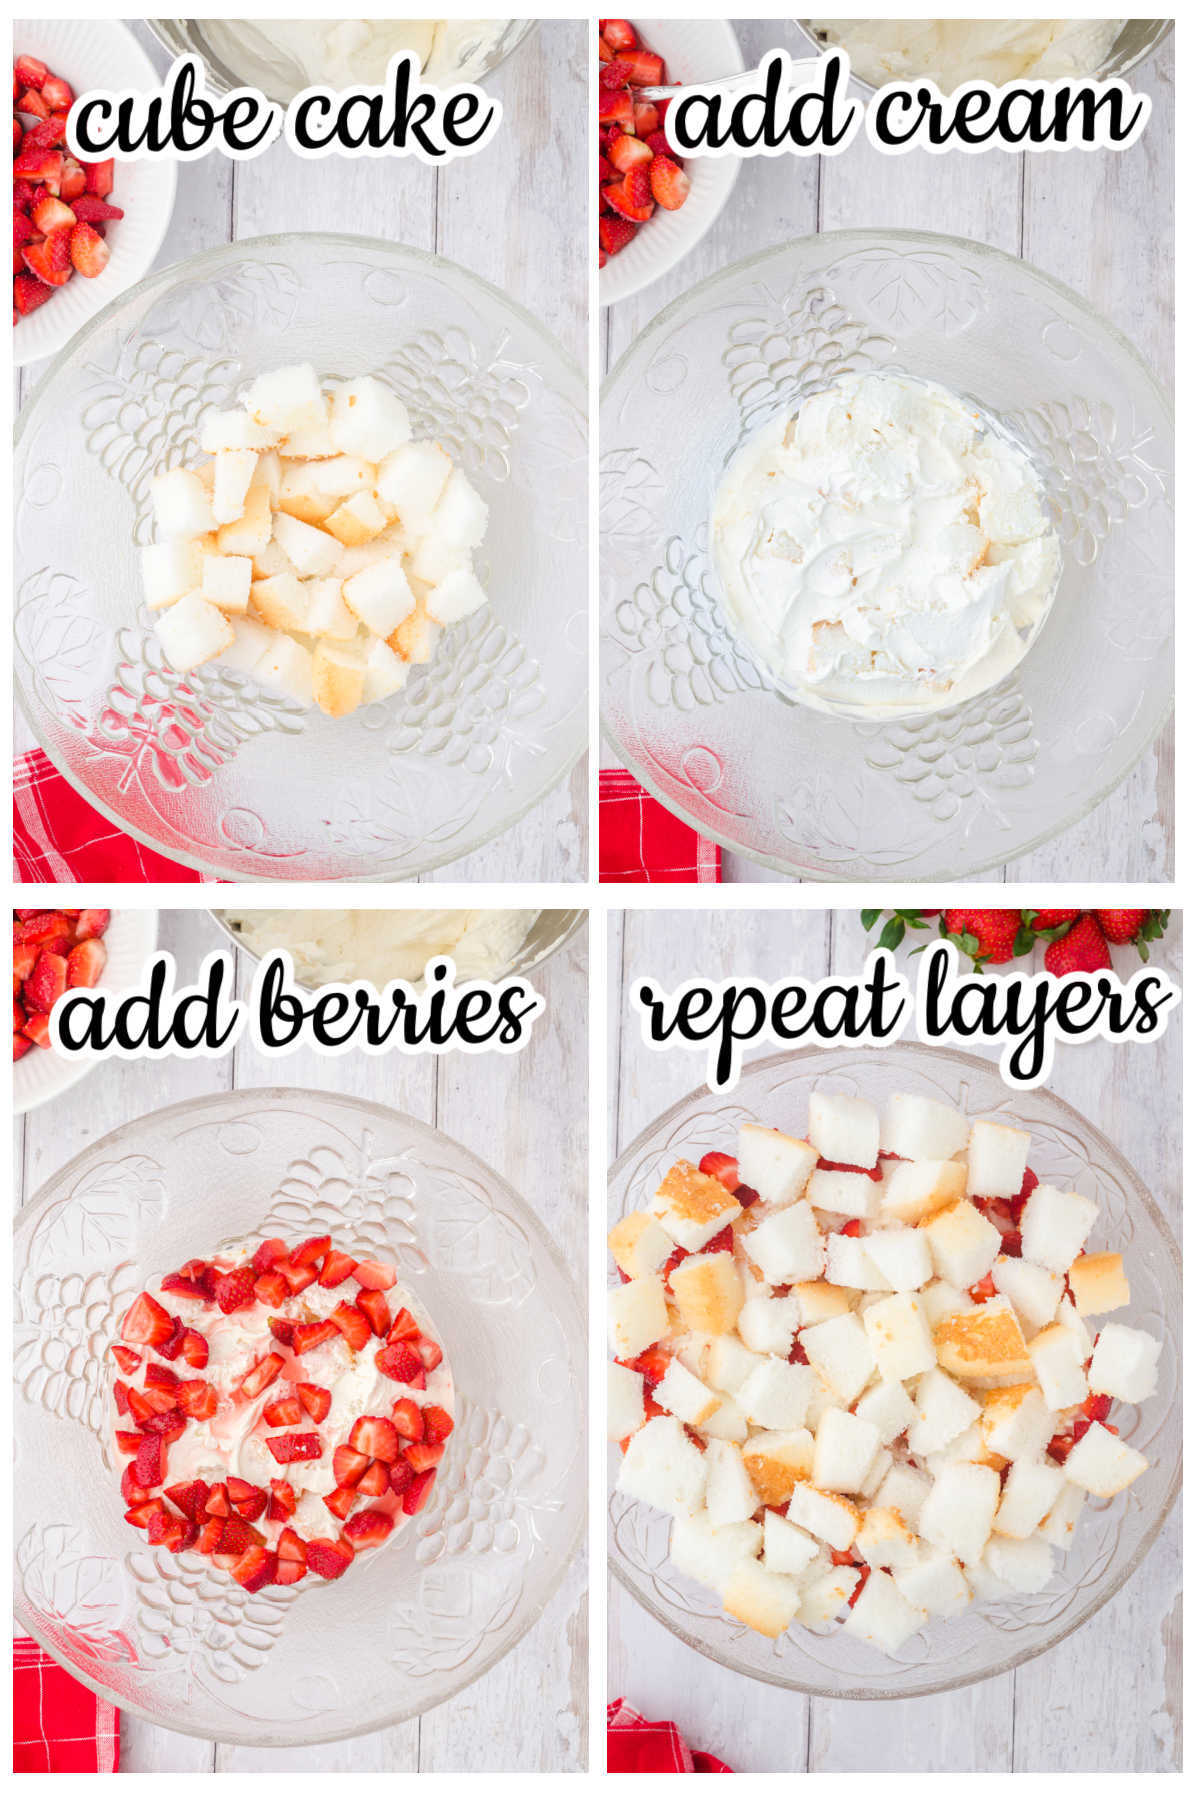 Step by step images showing how to make this recipe.